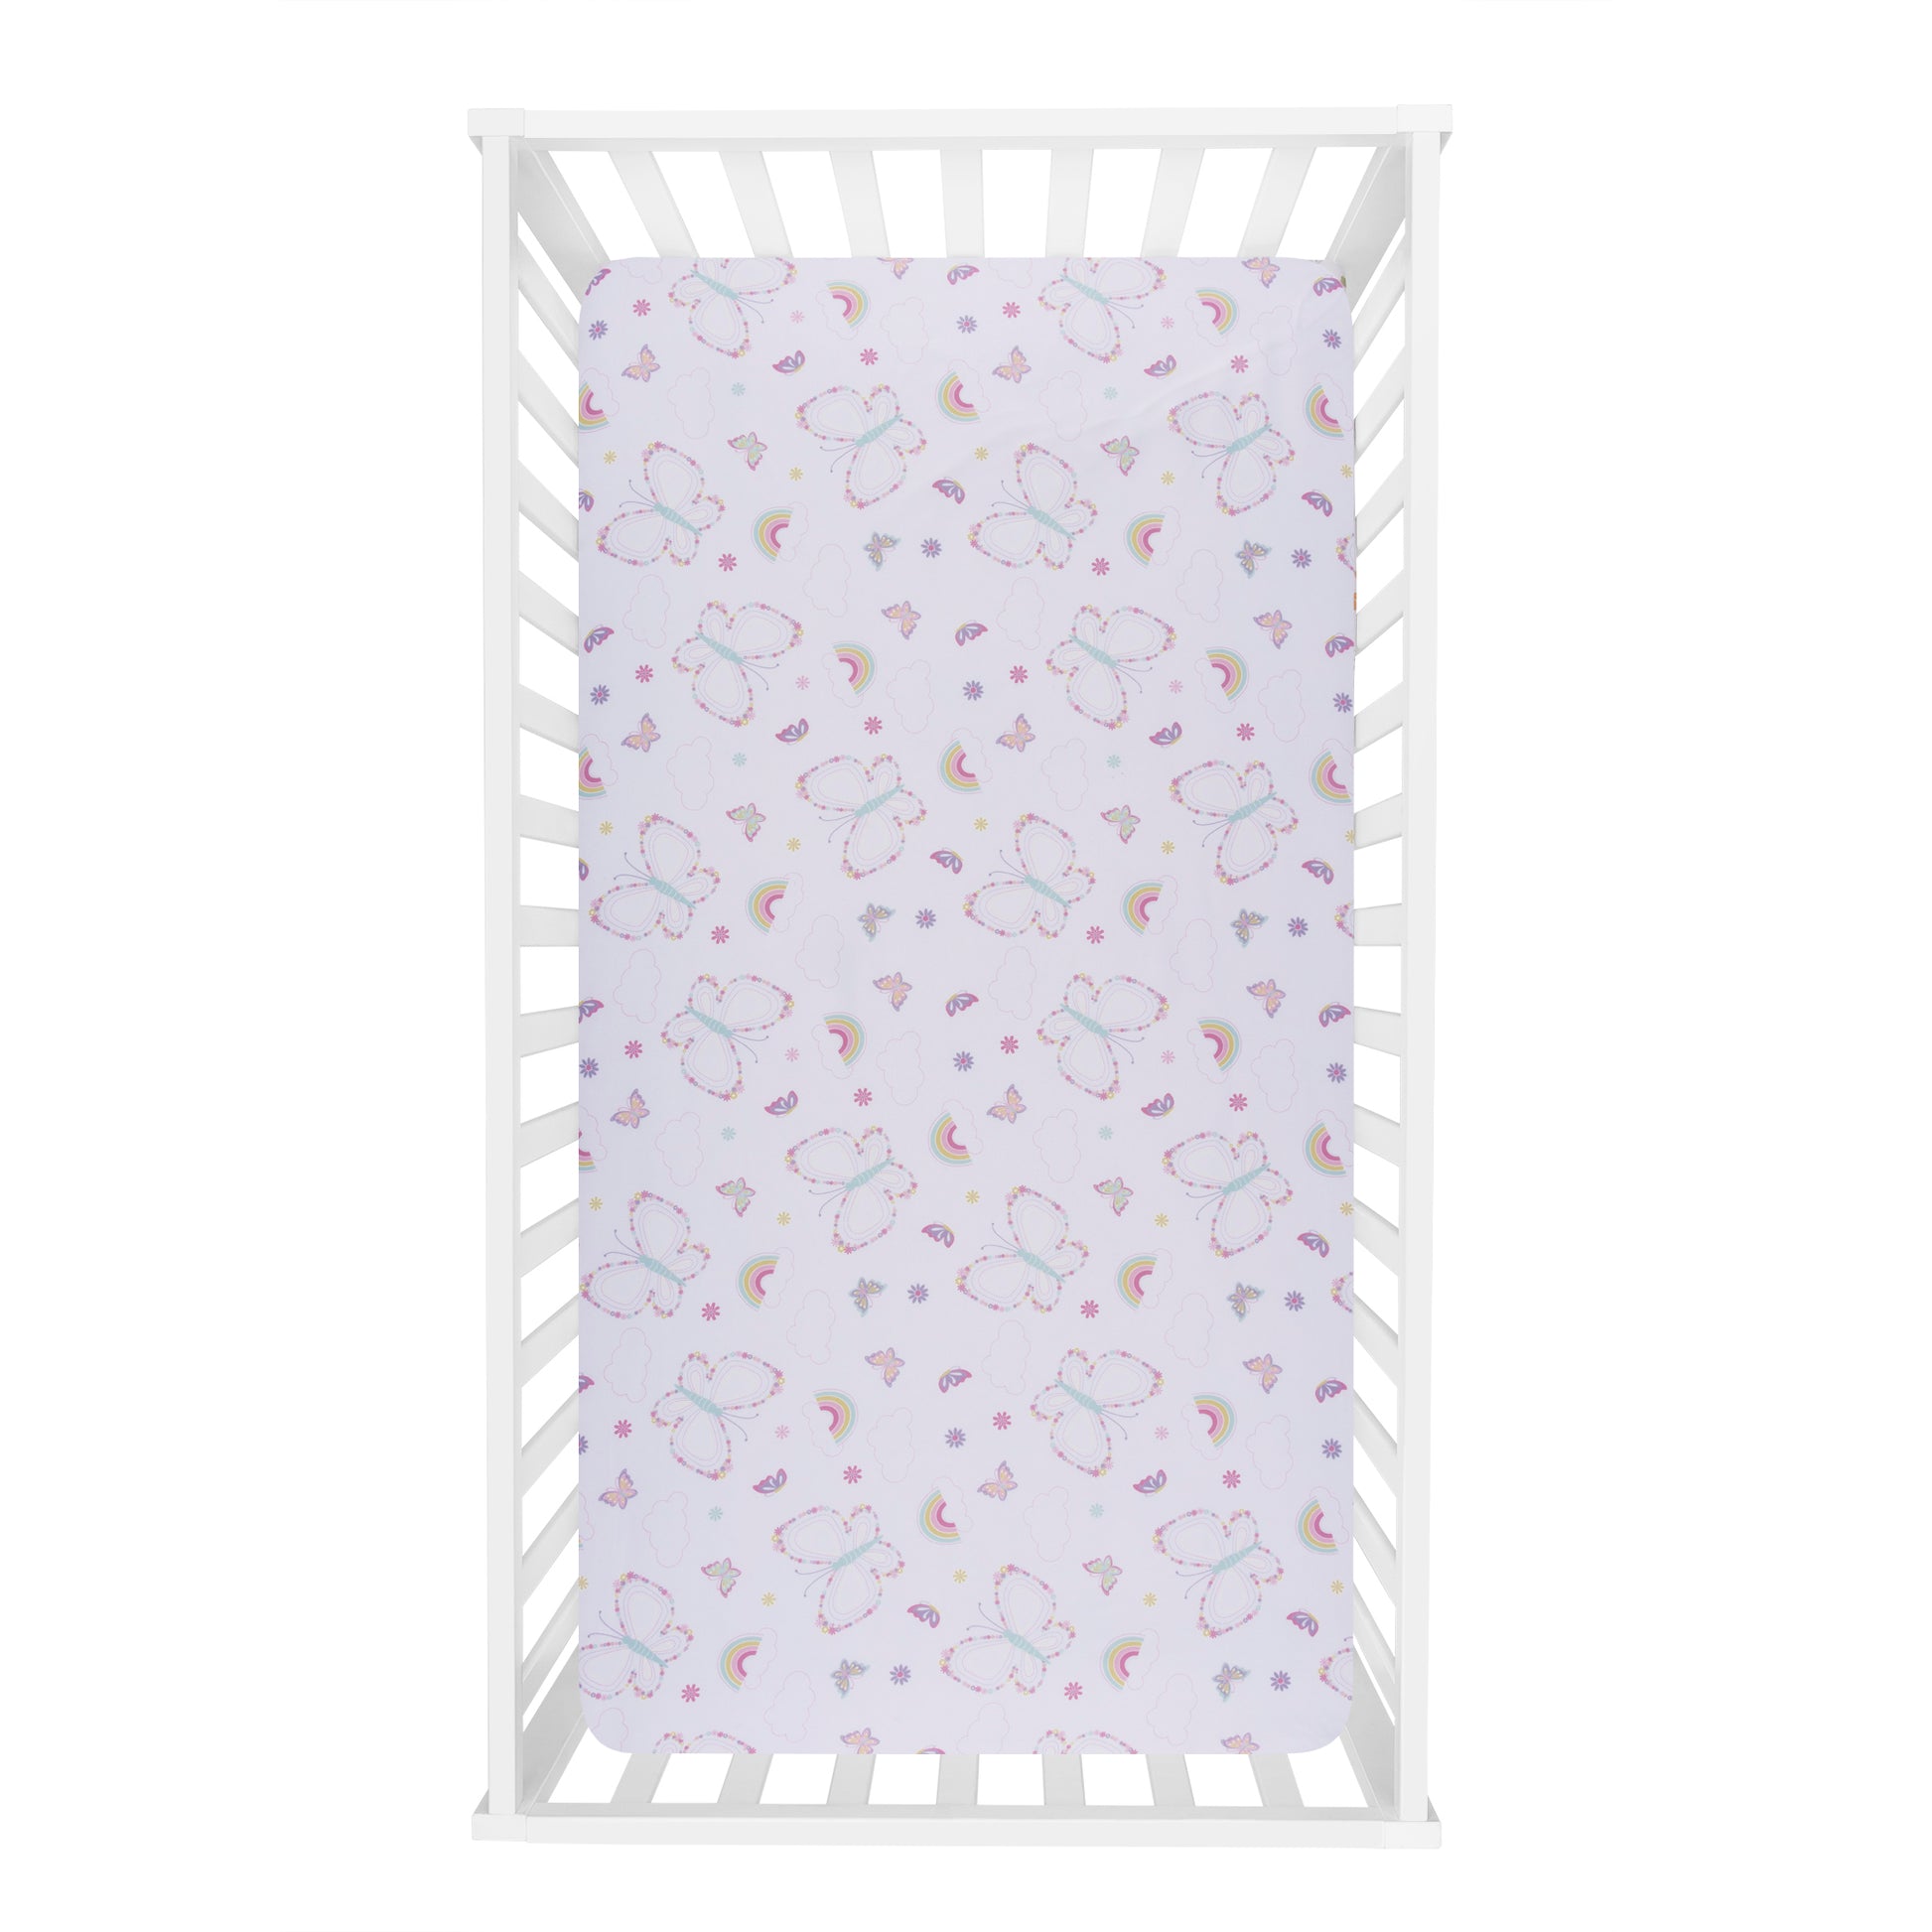  Floral Butterfly 4 Piece Crib Bedding Set; overhead view